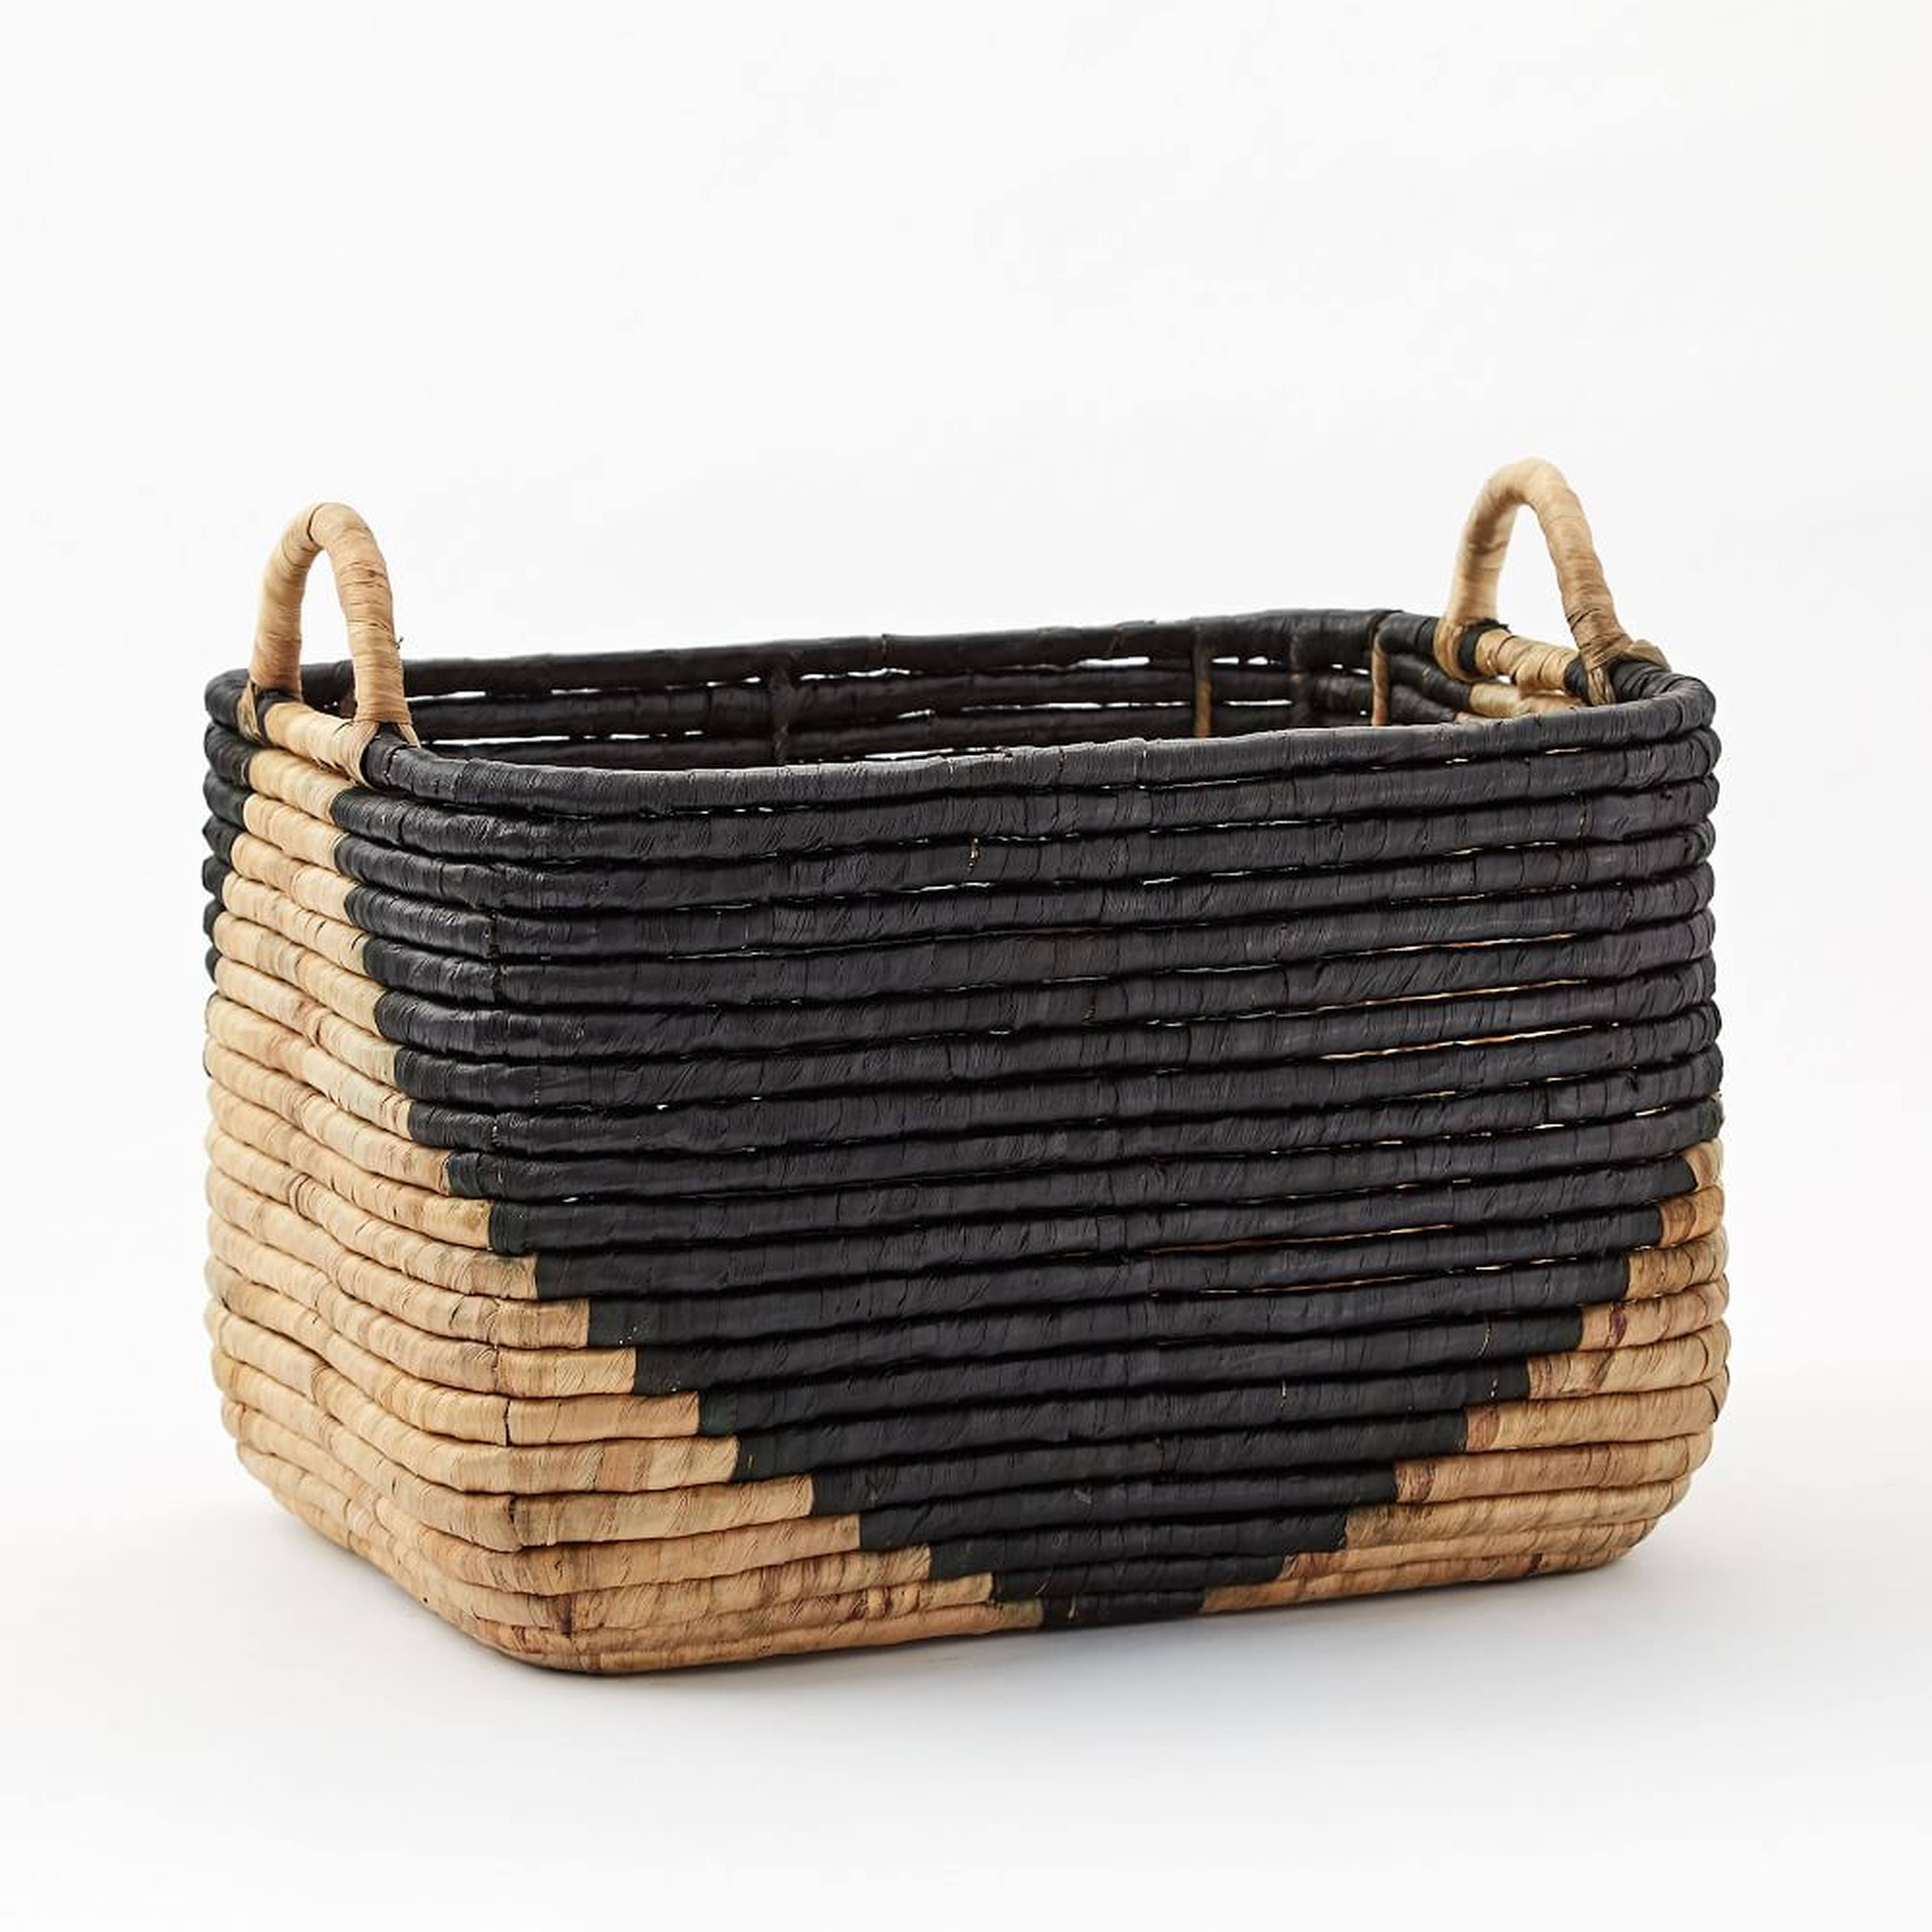 Two-Tone Woven Seagrass, Handle Baskets, Large, 19"W x 15"D x 15"H - West Elm